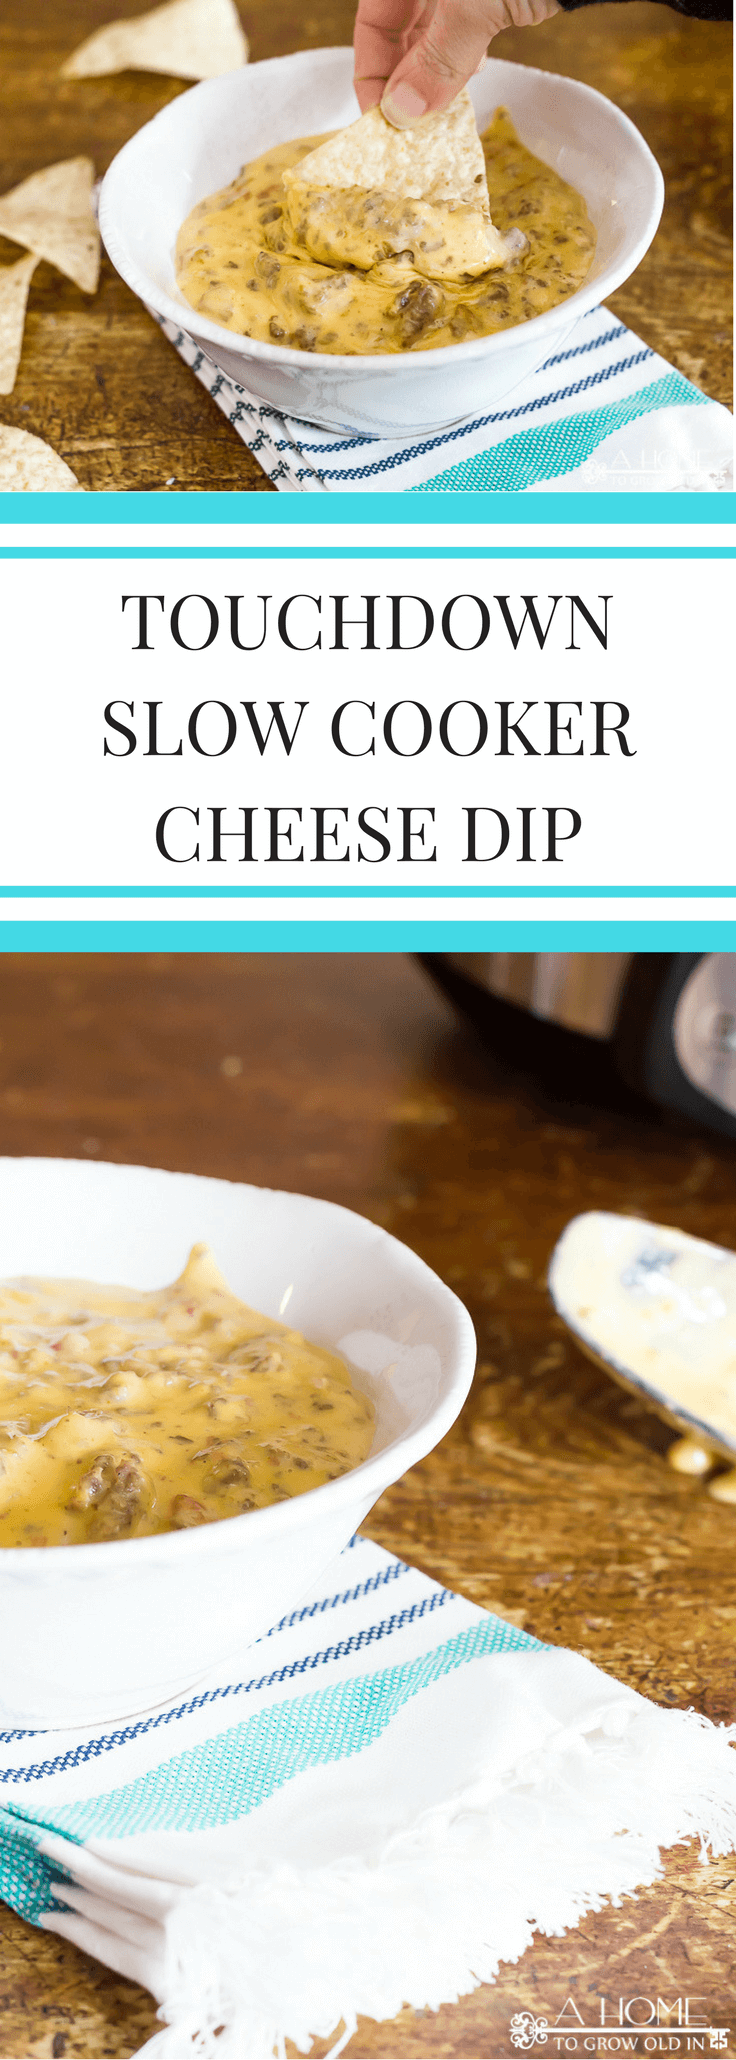 This Touchdown Slow Cooker Cheese Dip recipe will make you the MVP of your next Super Bowl party or get-together! This is one you must try!